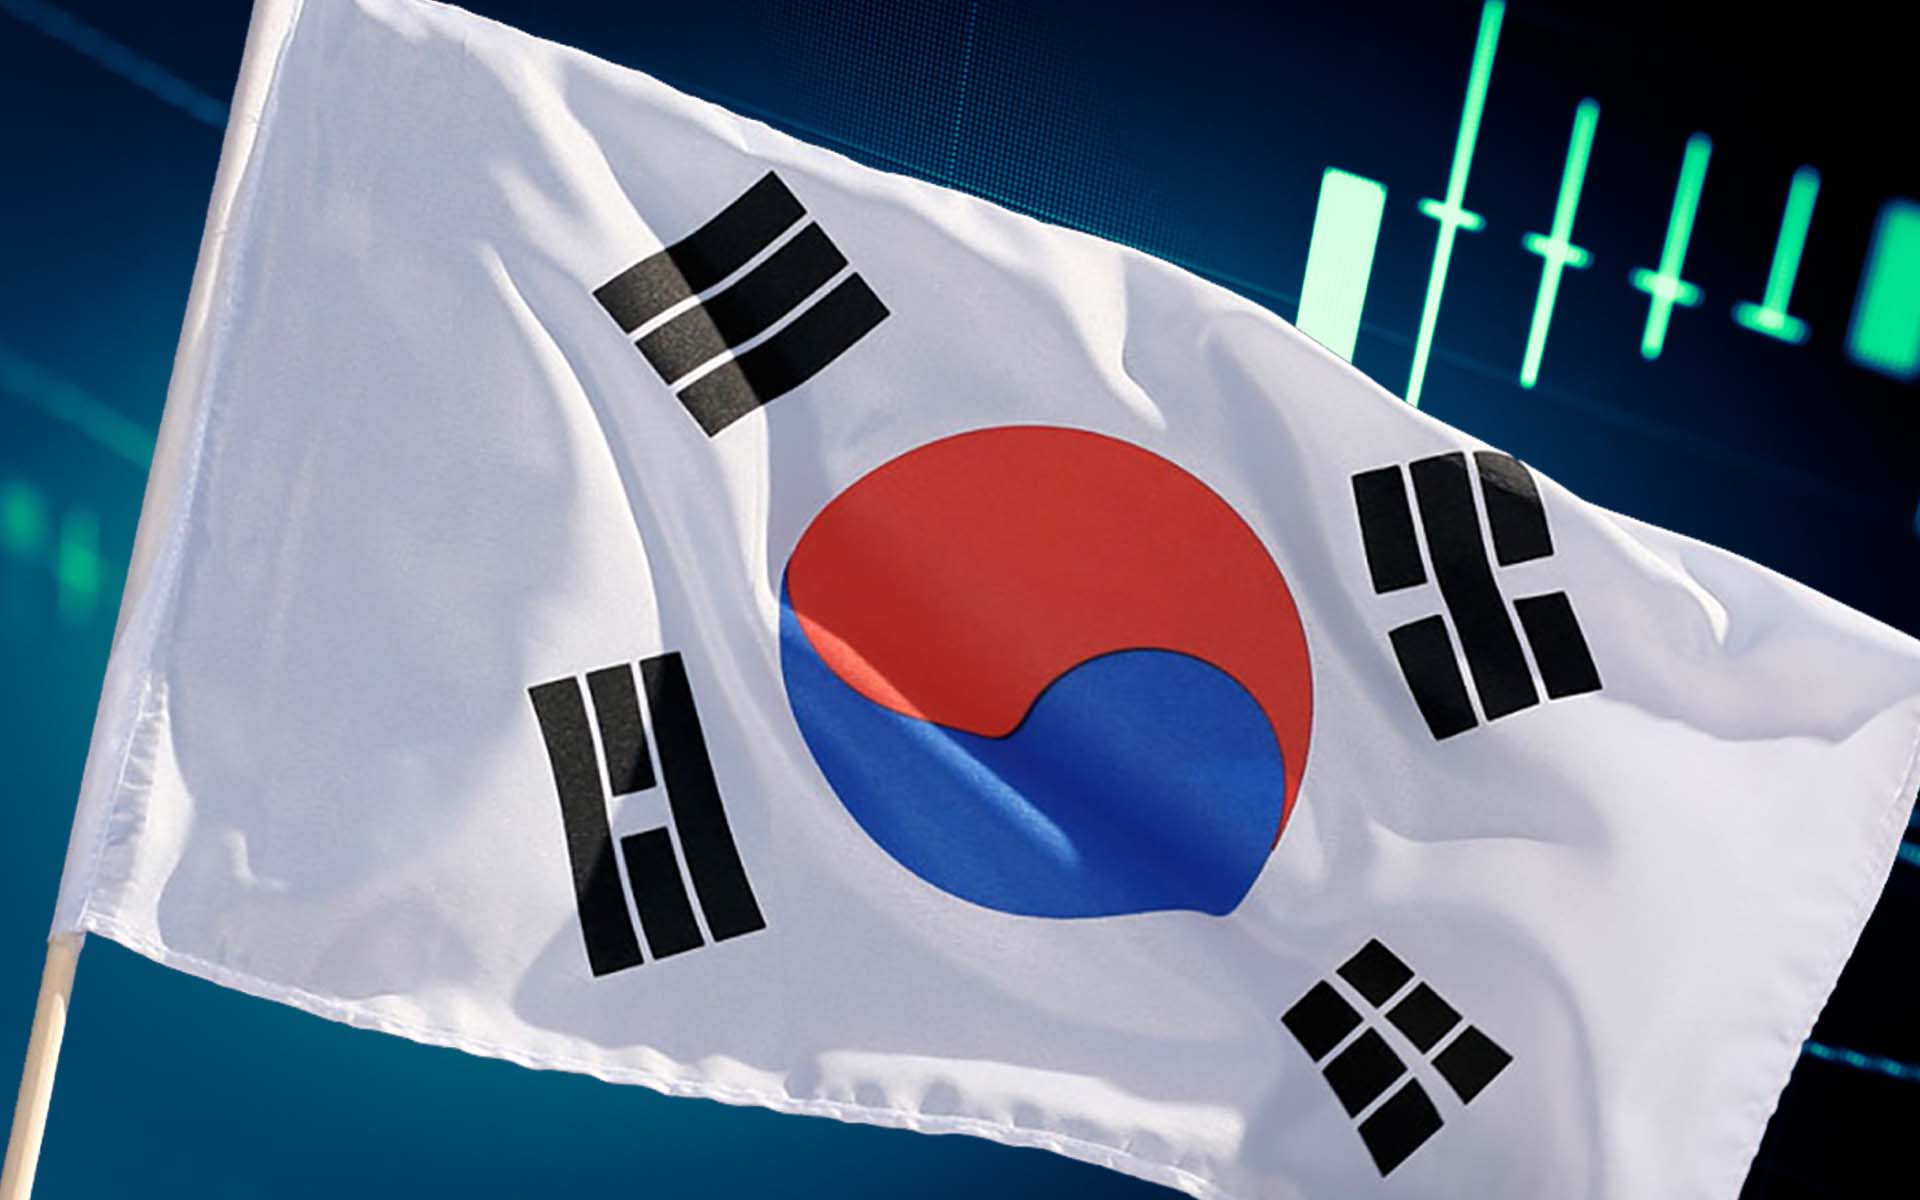 South Korea continues to make headlines in the cryptocurrency world as authorities raided and confiscated property from three cryptocurrency exchanges following a January investigation.